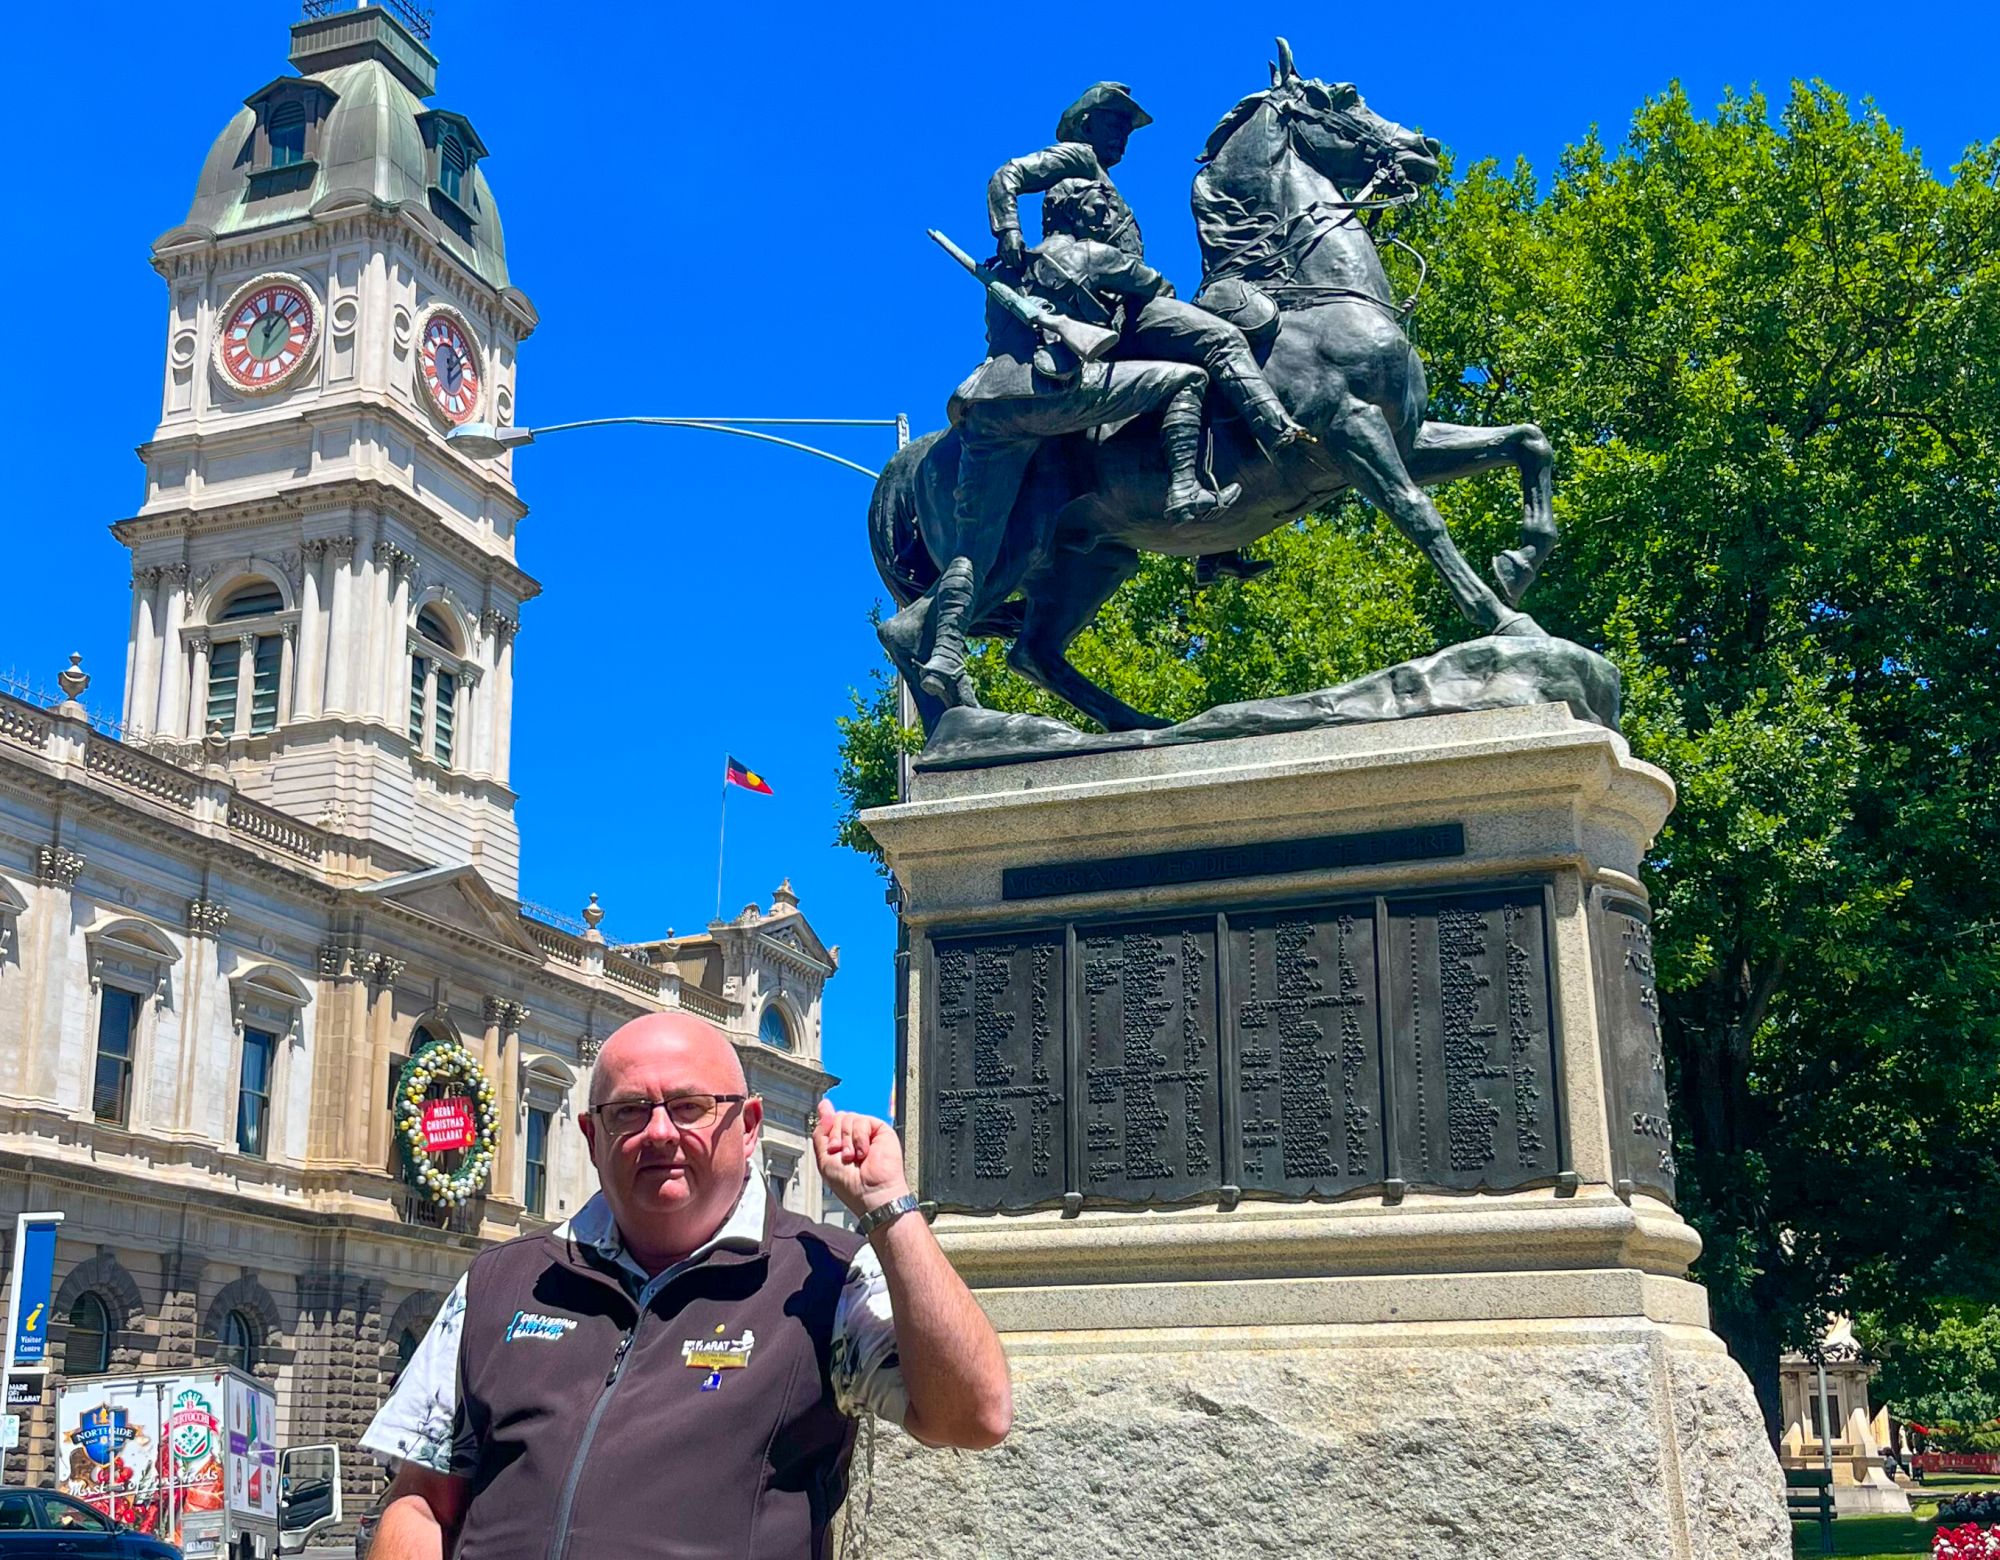 Mayor Cr Des Hudson standing in front of the Boer War Memorial Statue in Sturt Street with Town Hall in the background.